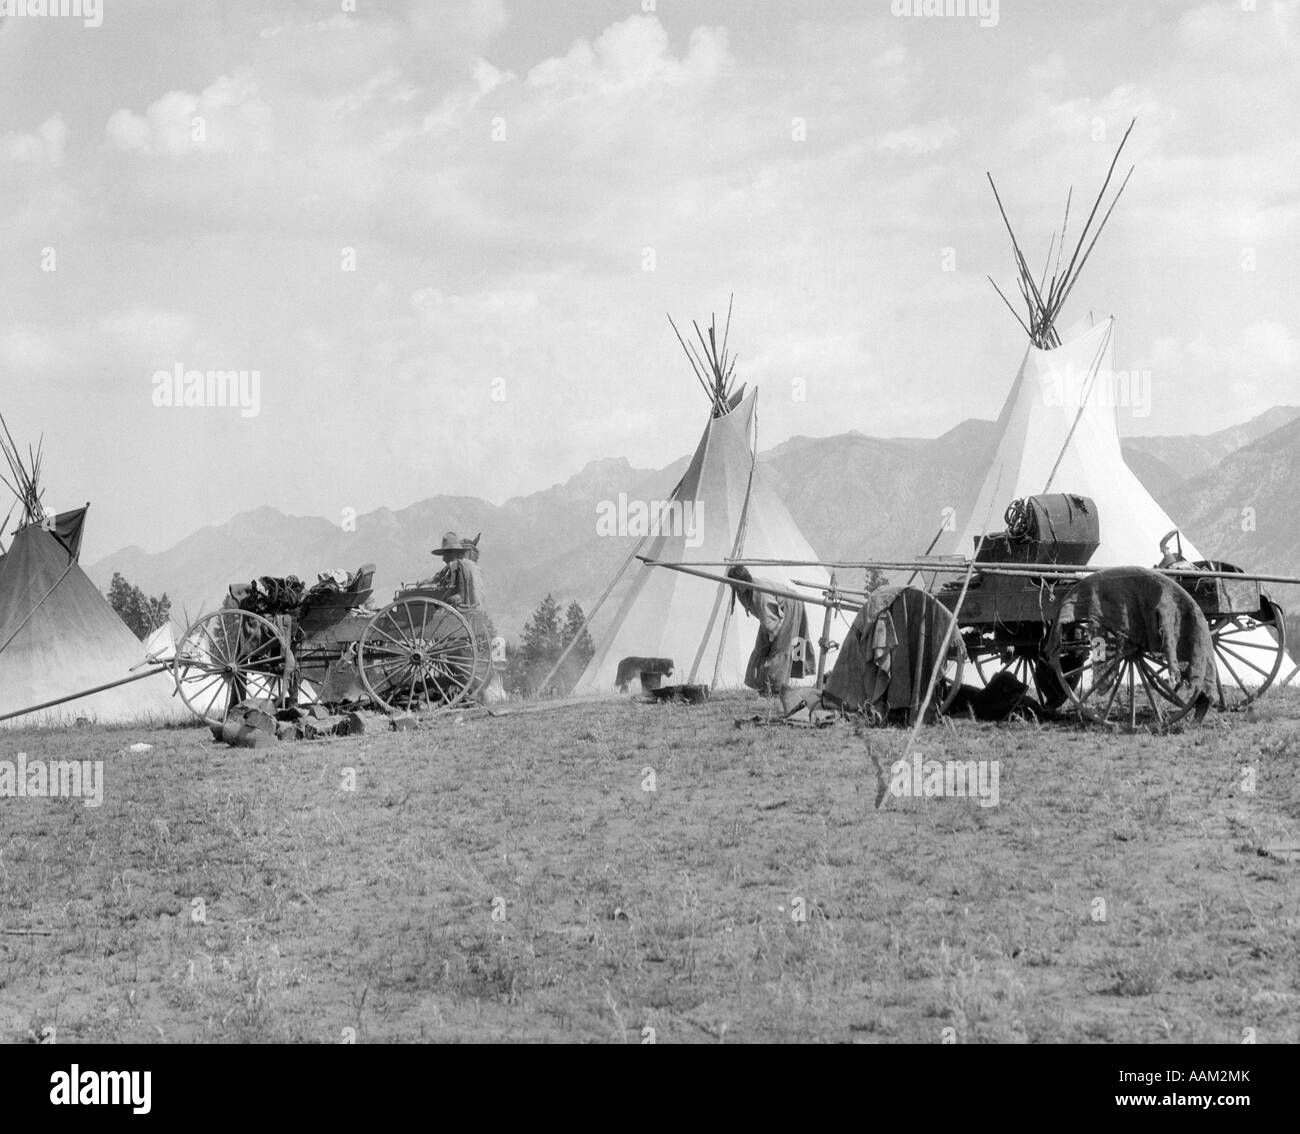 1920s 1930s NATIVE AMERICAN KOOTENAI NATIVE AMERICAN INDIAN CAMP VILLAGE TIPI TEEPEE WAGONS MOUNTAINS IN BACKGROUND BRITISH Stock Photo